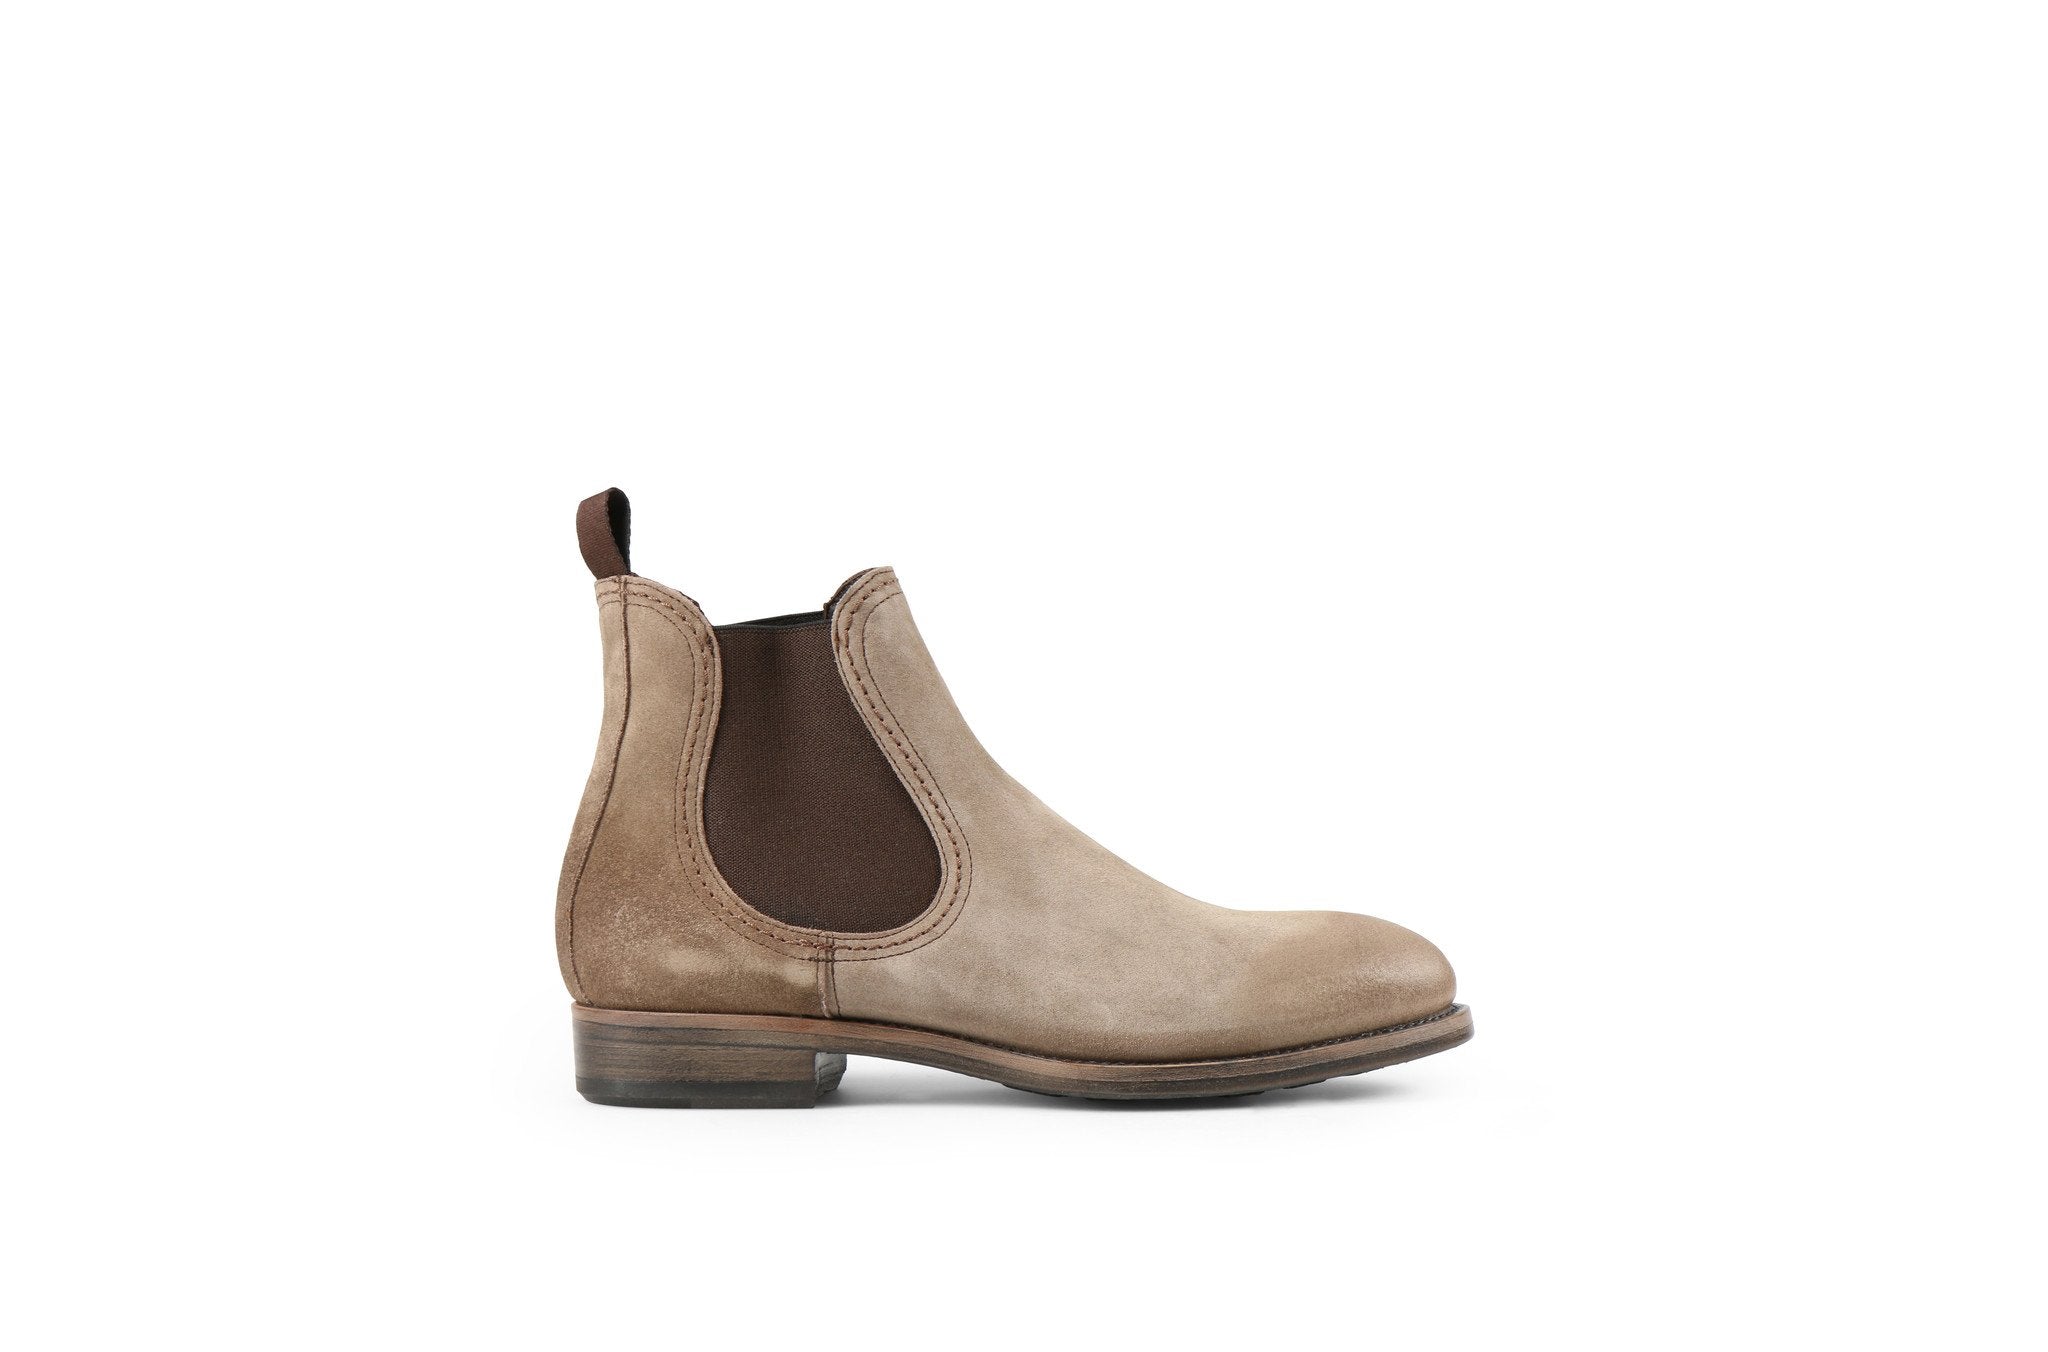 Hanoi Sand Suede Leather Chelsea Boots